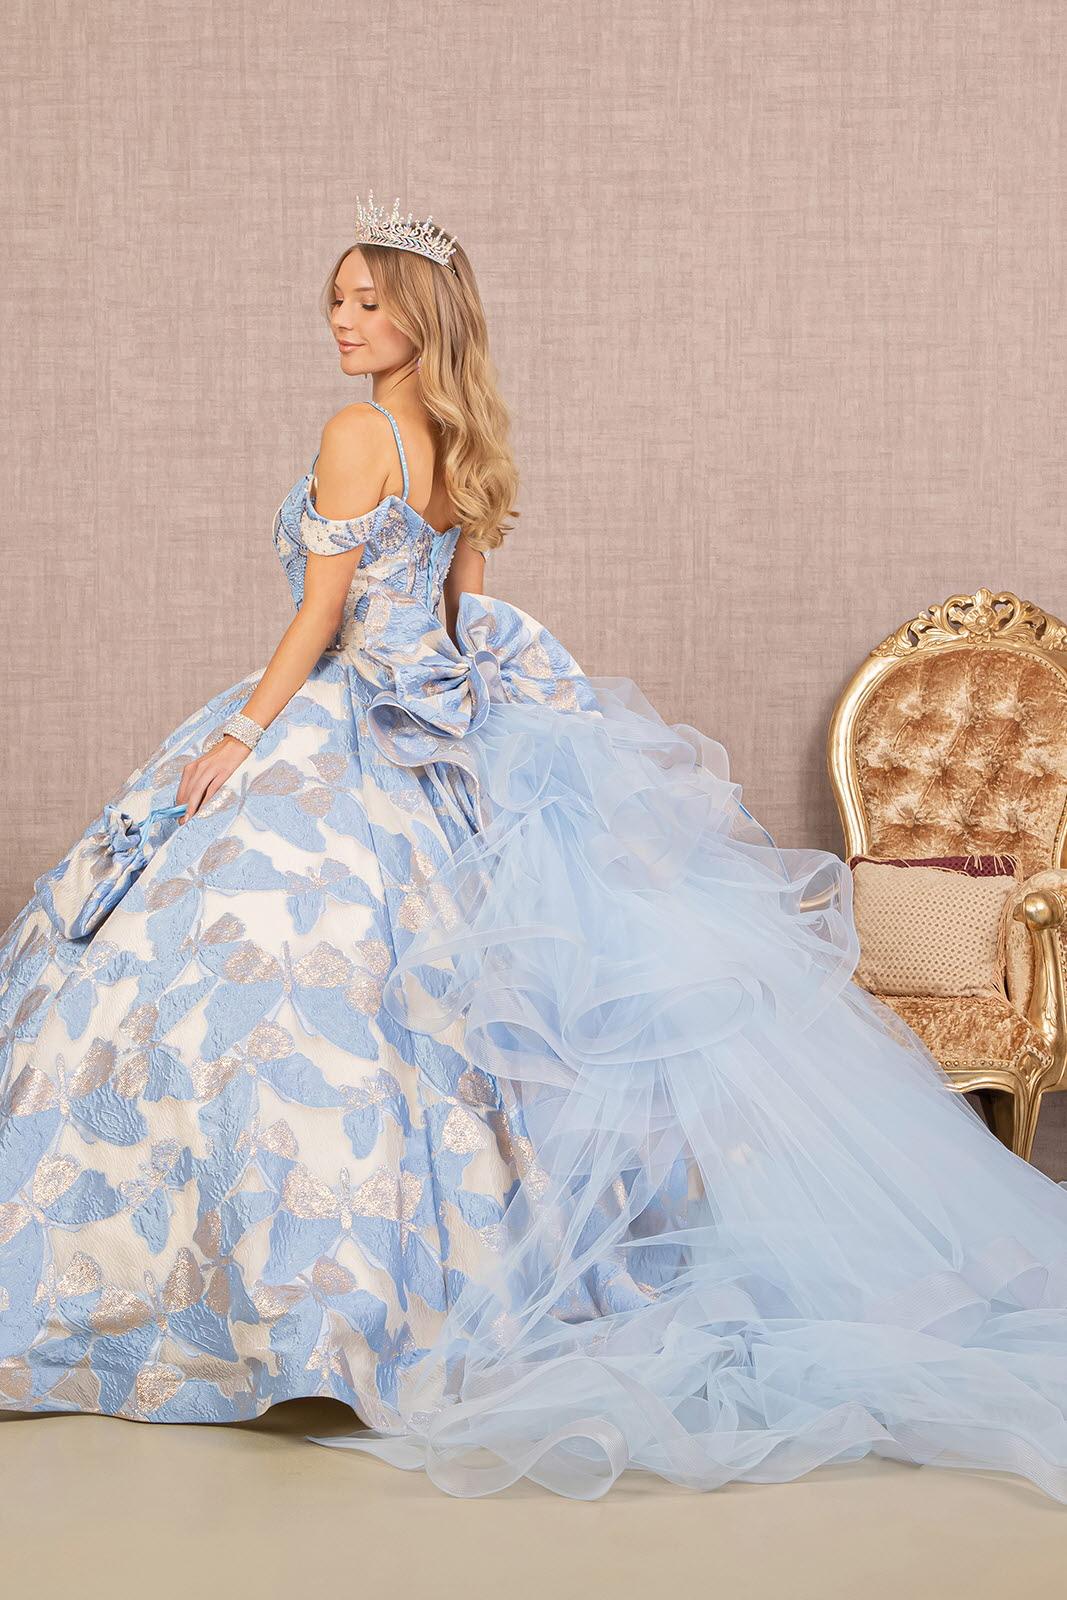 Amazon.com: FUSLW Girls Cinderella Princess Pageant Ball Gowns Kids Tulle  Flower Girls Dresses : Clothing, Shoes & Jewelry